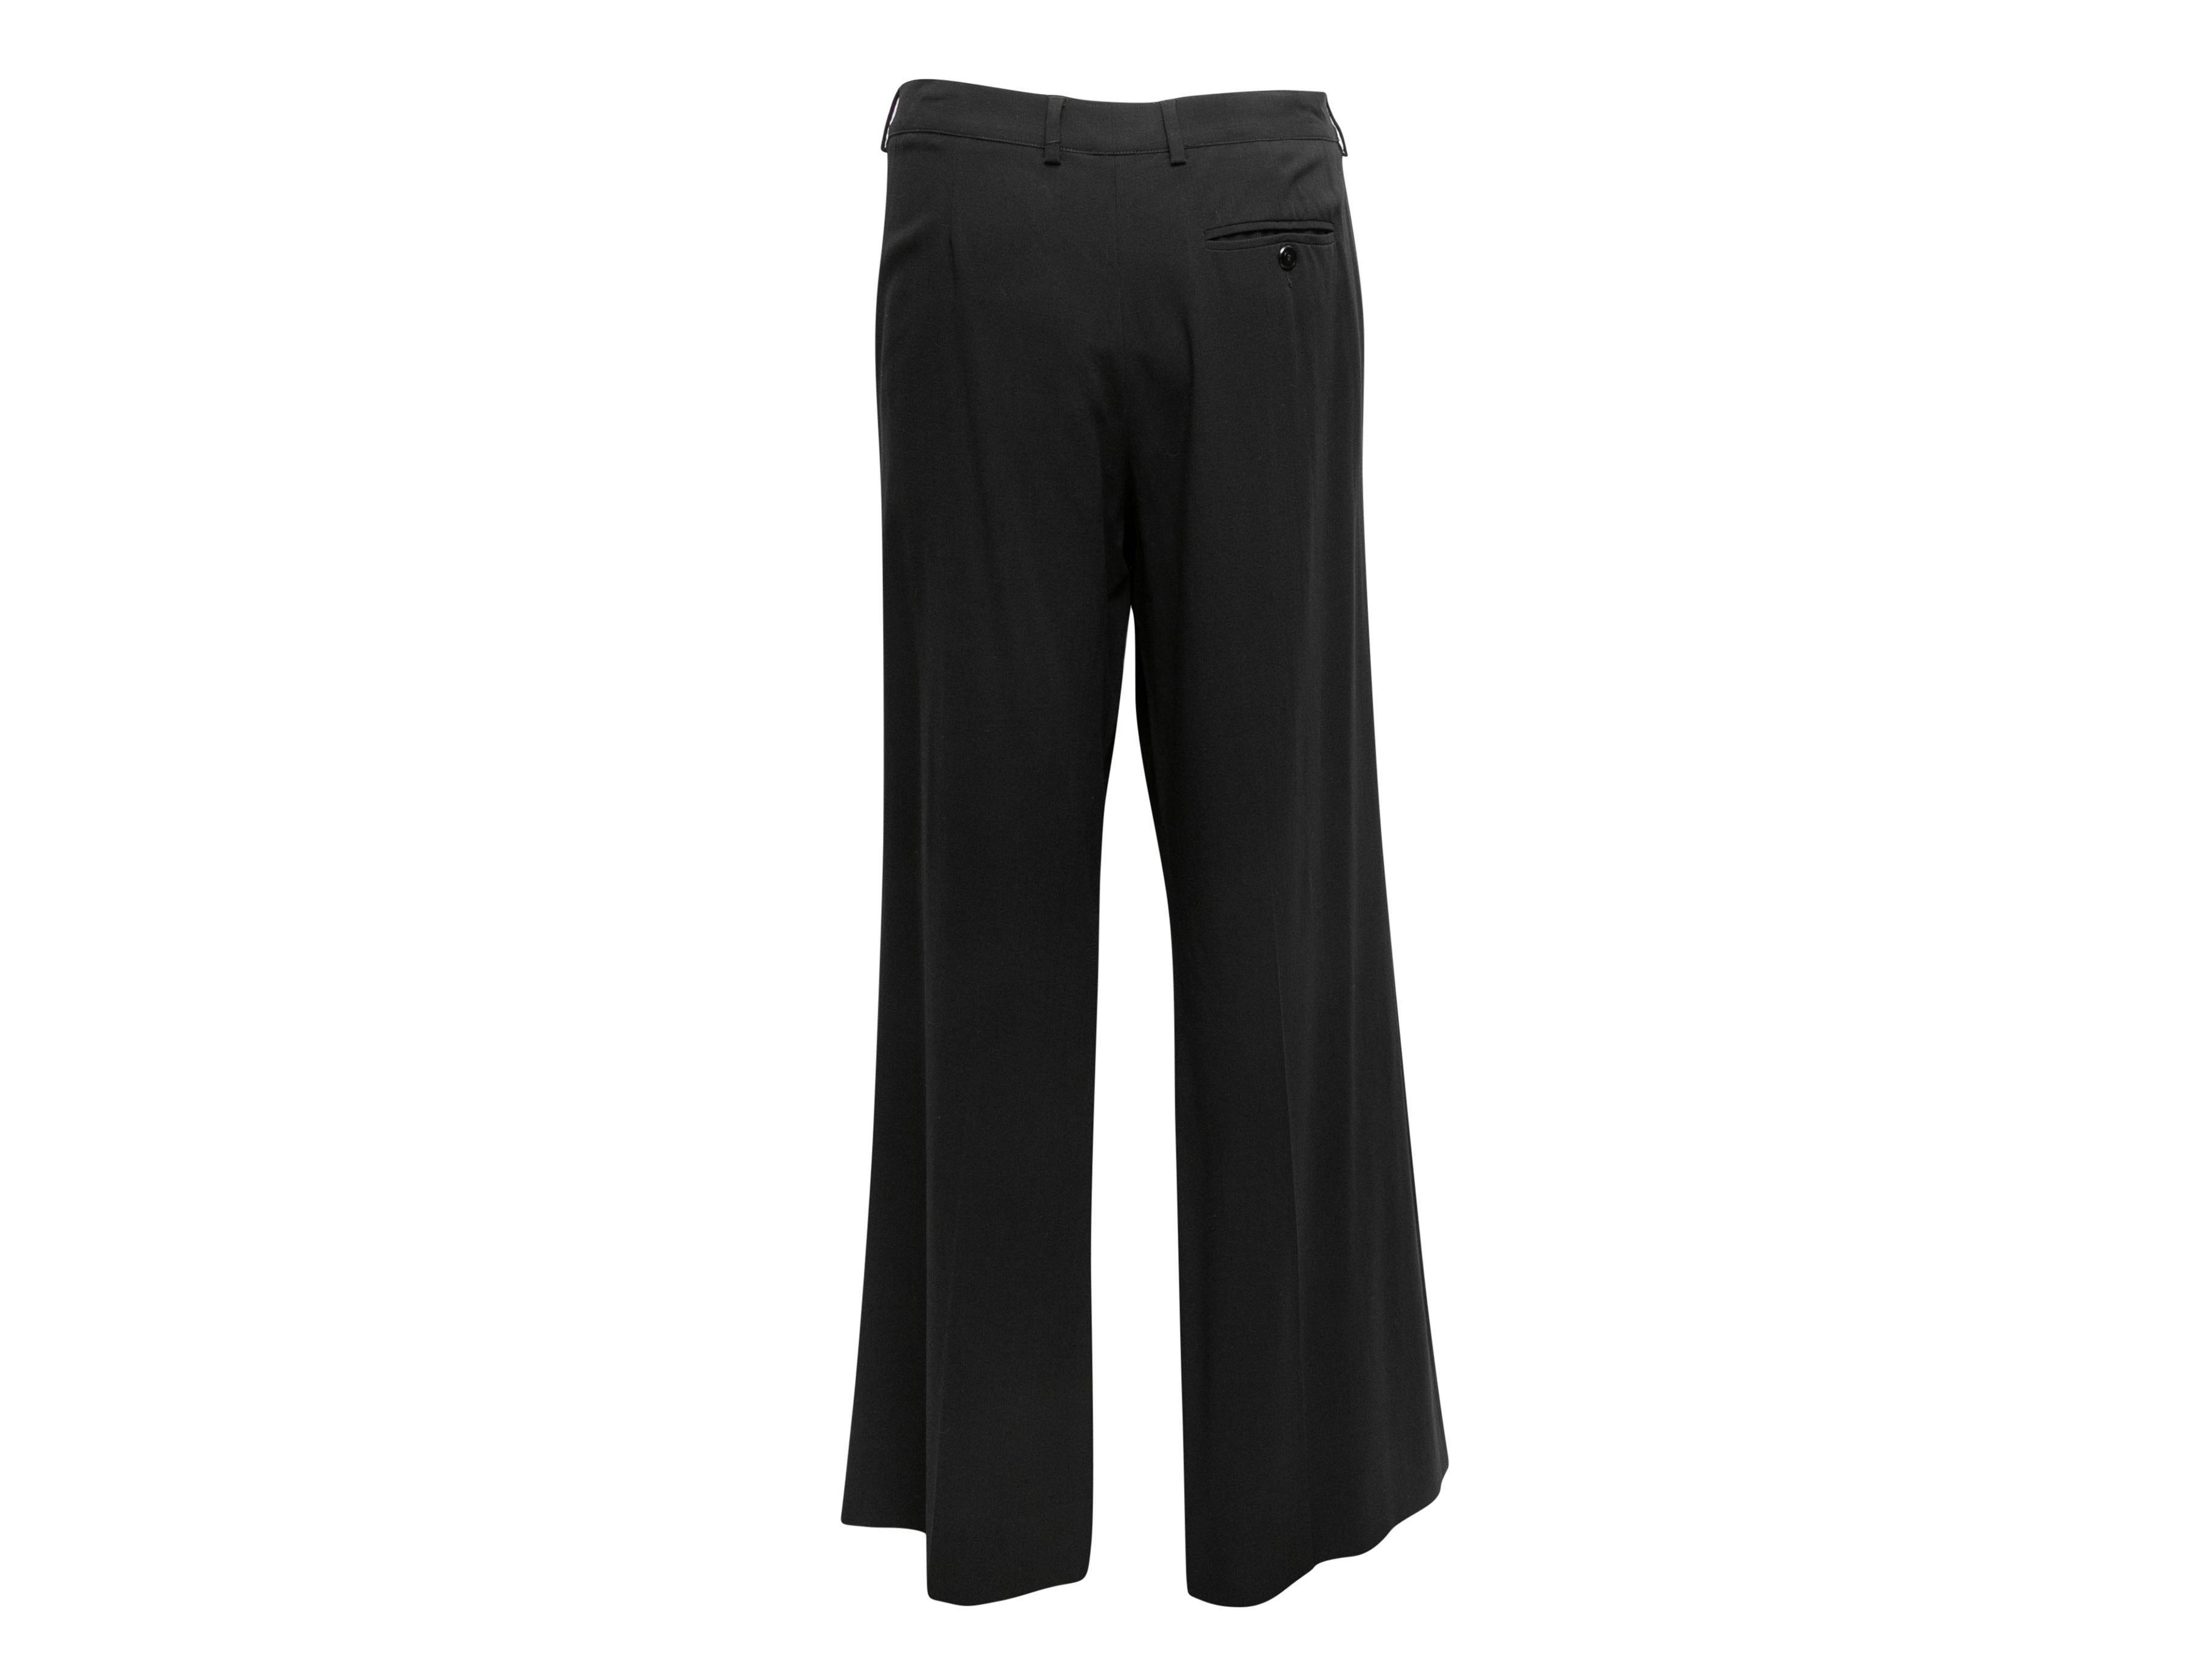 Vintage Black Chanel Spring/Summer 2003 Wool Trousers Size FR 48 In Good Condition For Sale In New York, NY